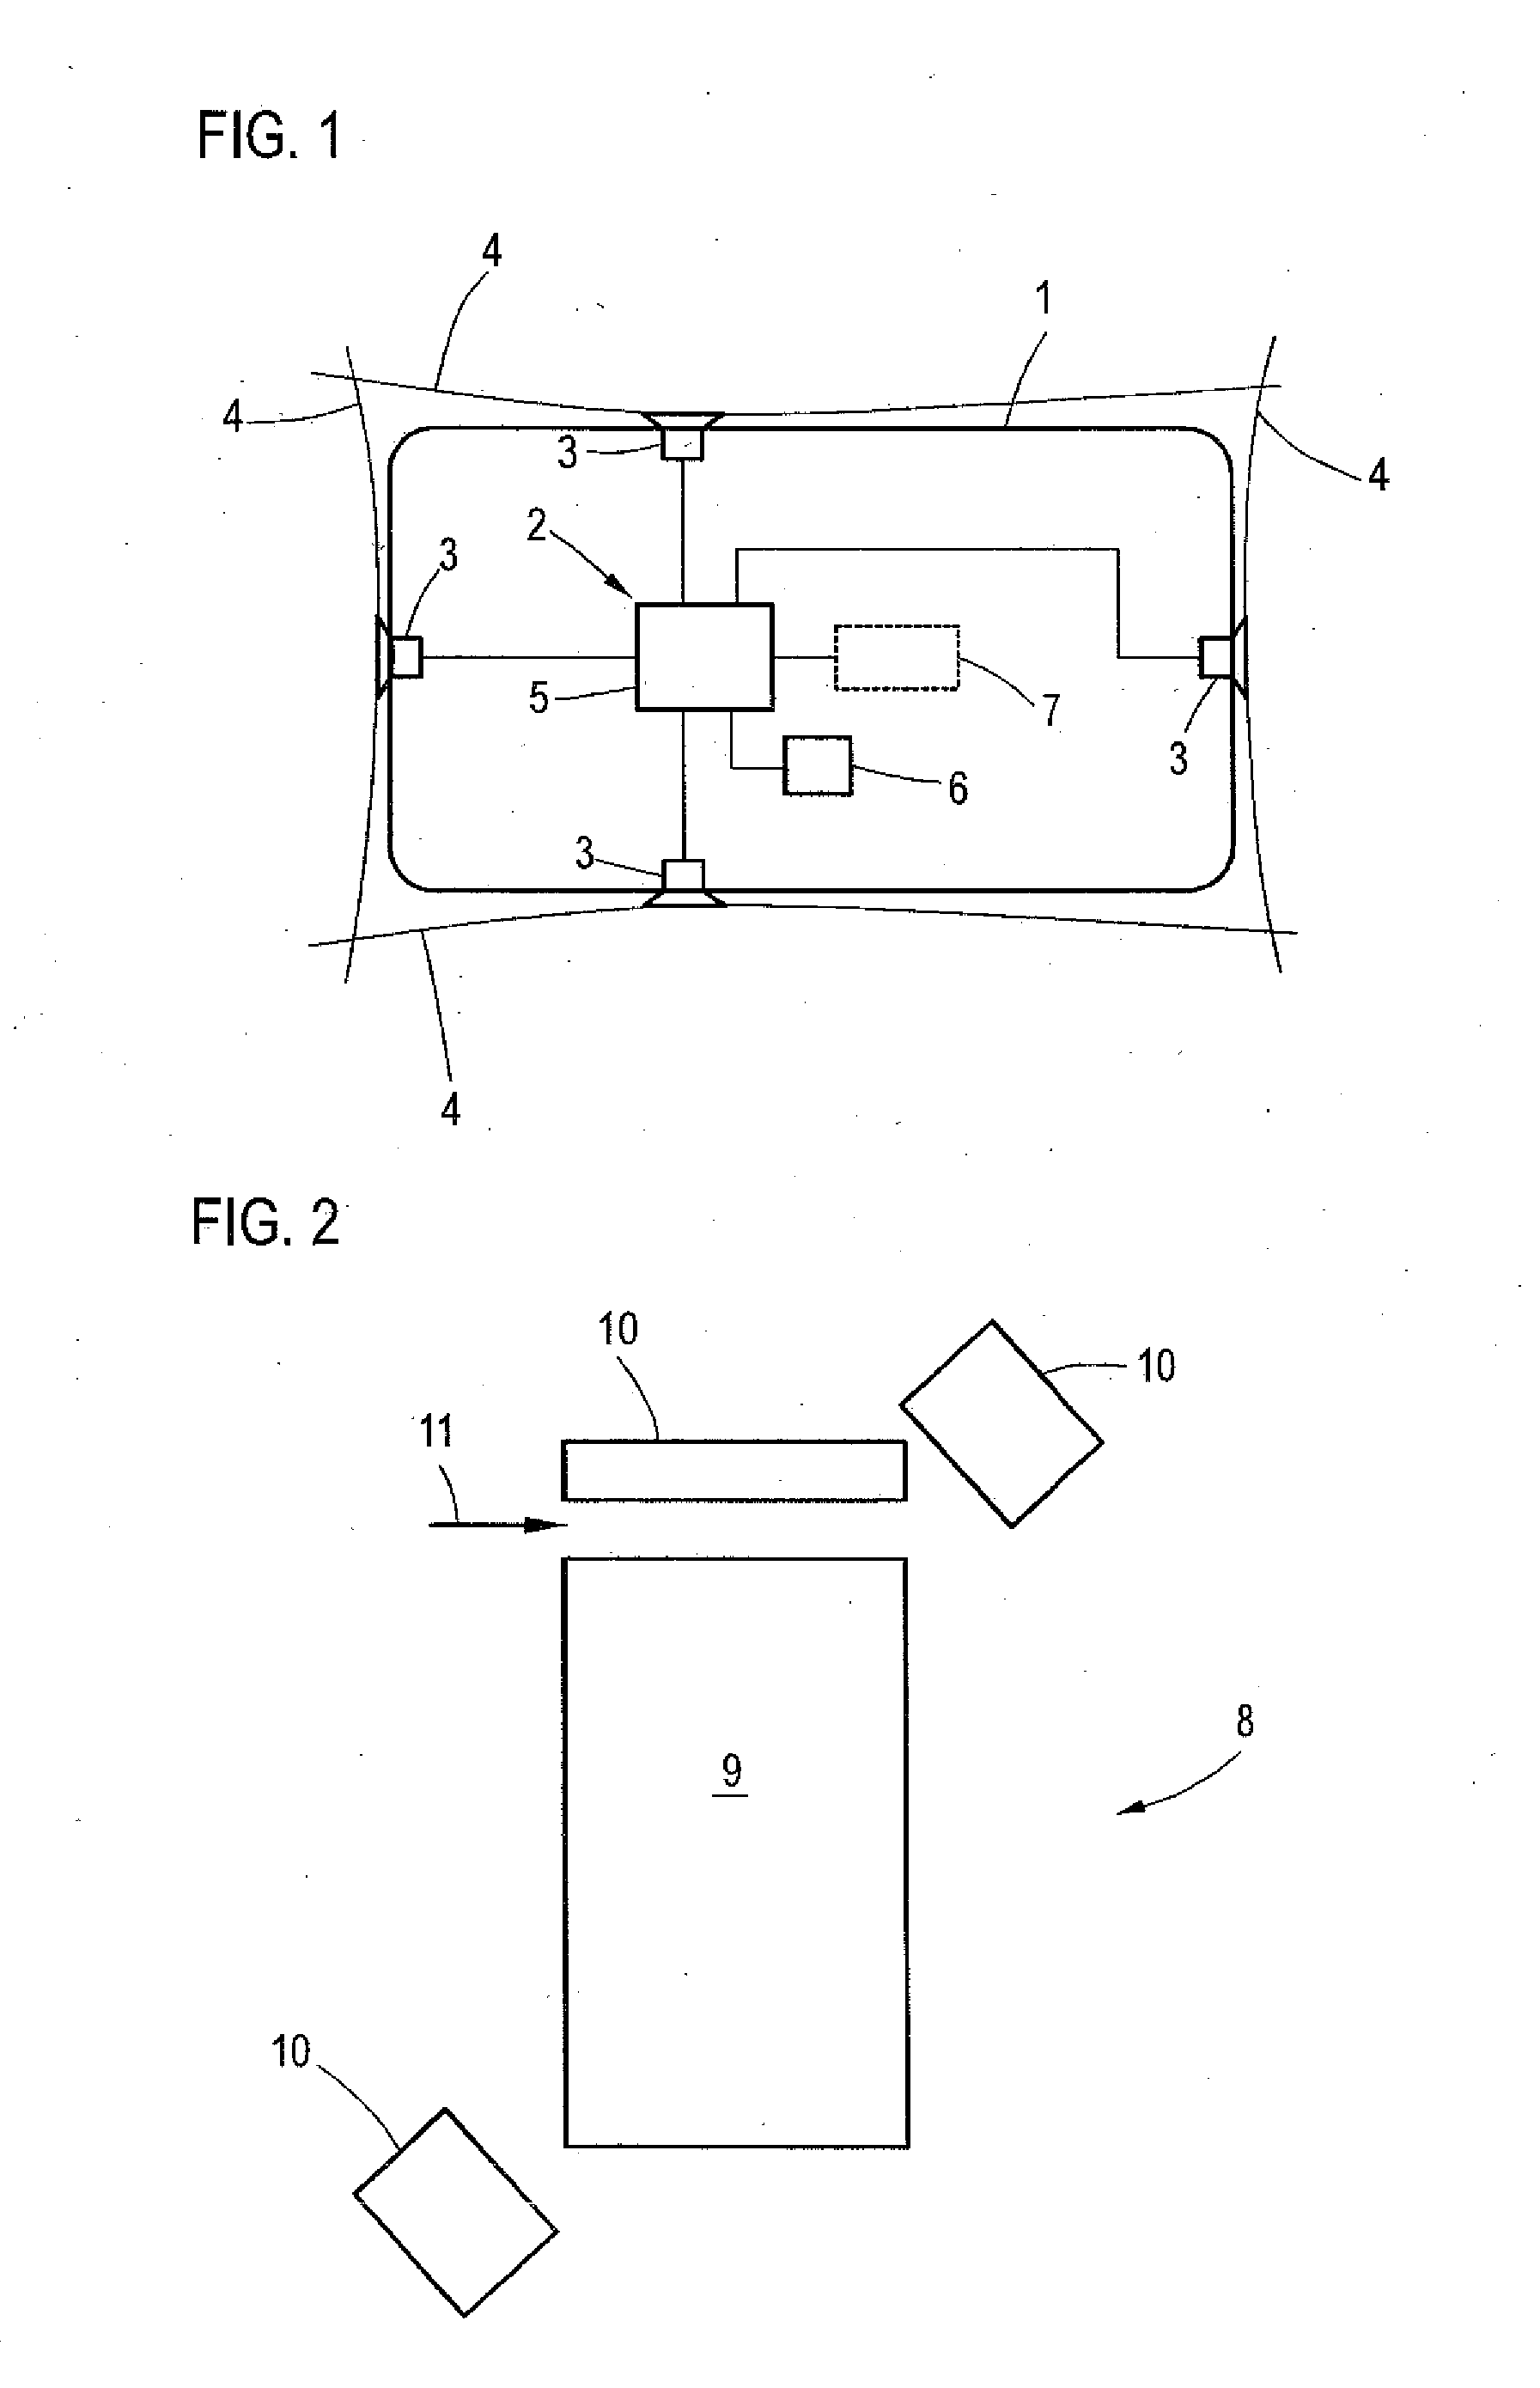 Method for operating a driver assist system for maneuvering and/or parking a motor vehicle